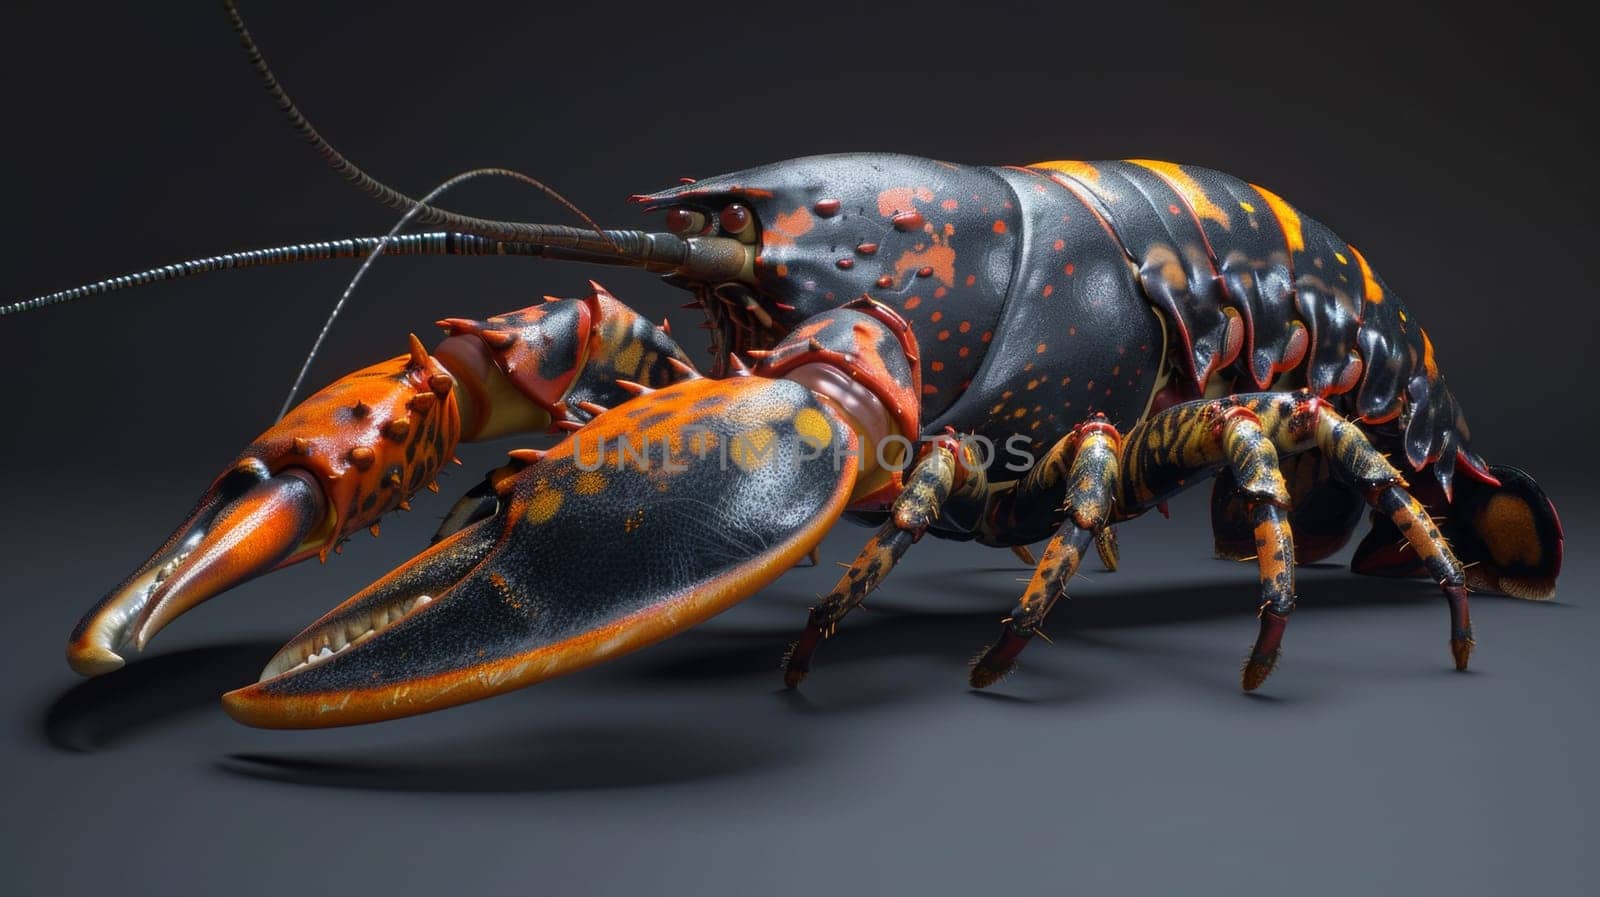 A large lobster with orange and black spots on its body, AI by starush